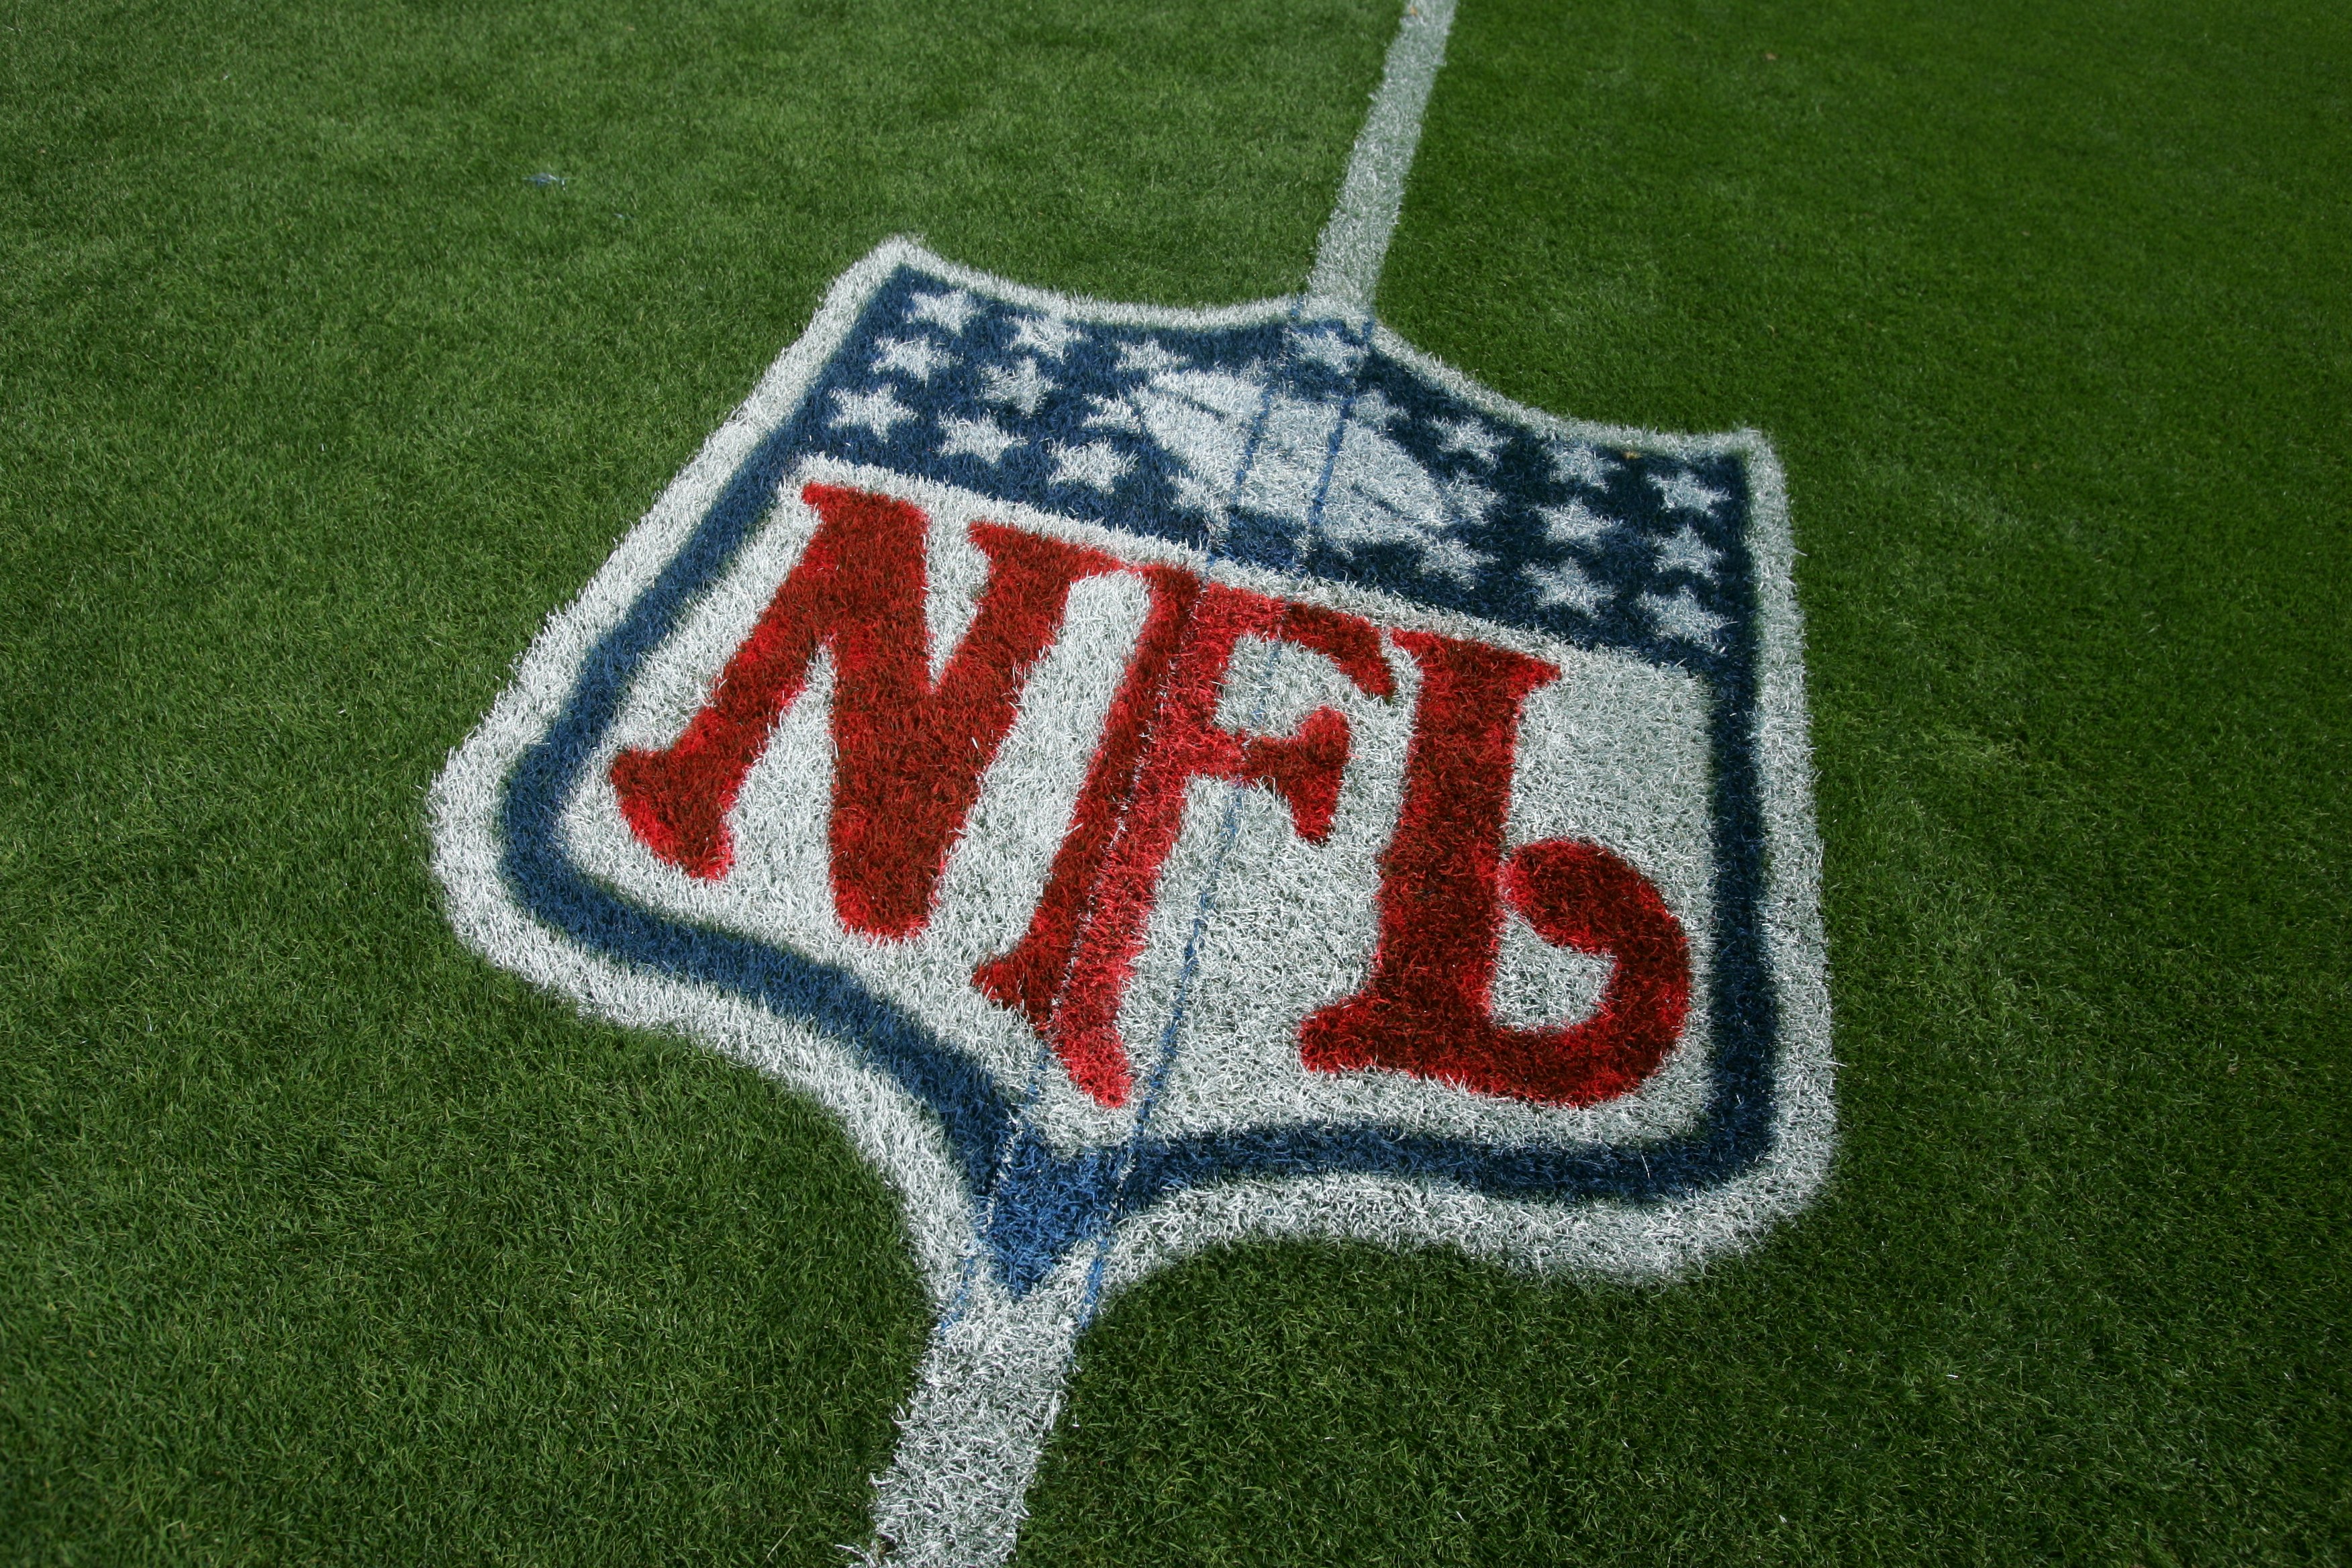 DENVER - SEPTEMBER 16: Detail view of a logo of the National Football League is painted on the field as the Denver Broncos defeated the Oakland Raiders 23-20 in overtime during week two NFL action at Invesco Field at Mile High on September 16, 2007 in Denver, Colorado. (Photo by Doug Pensinger/Getty Images)